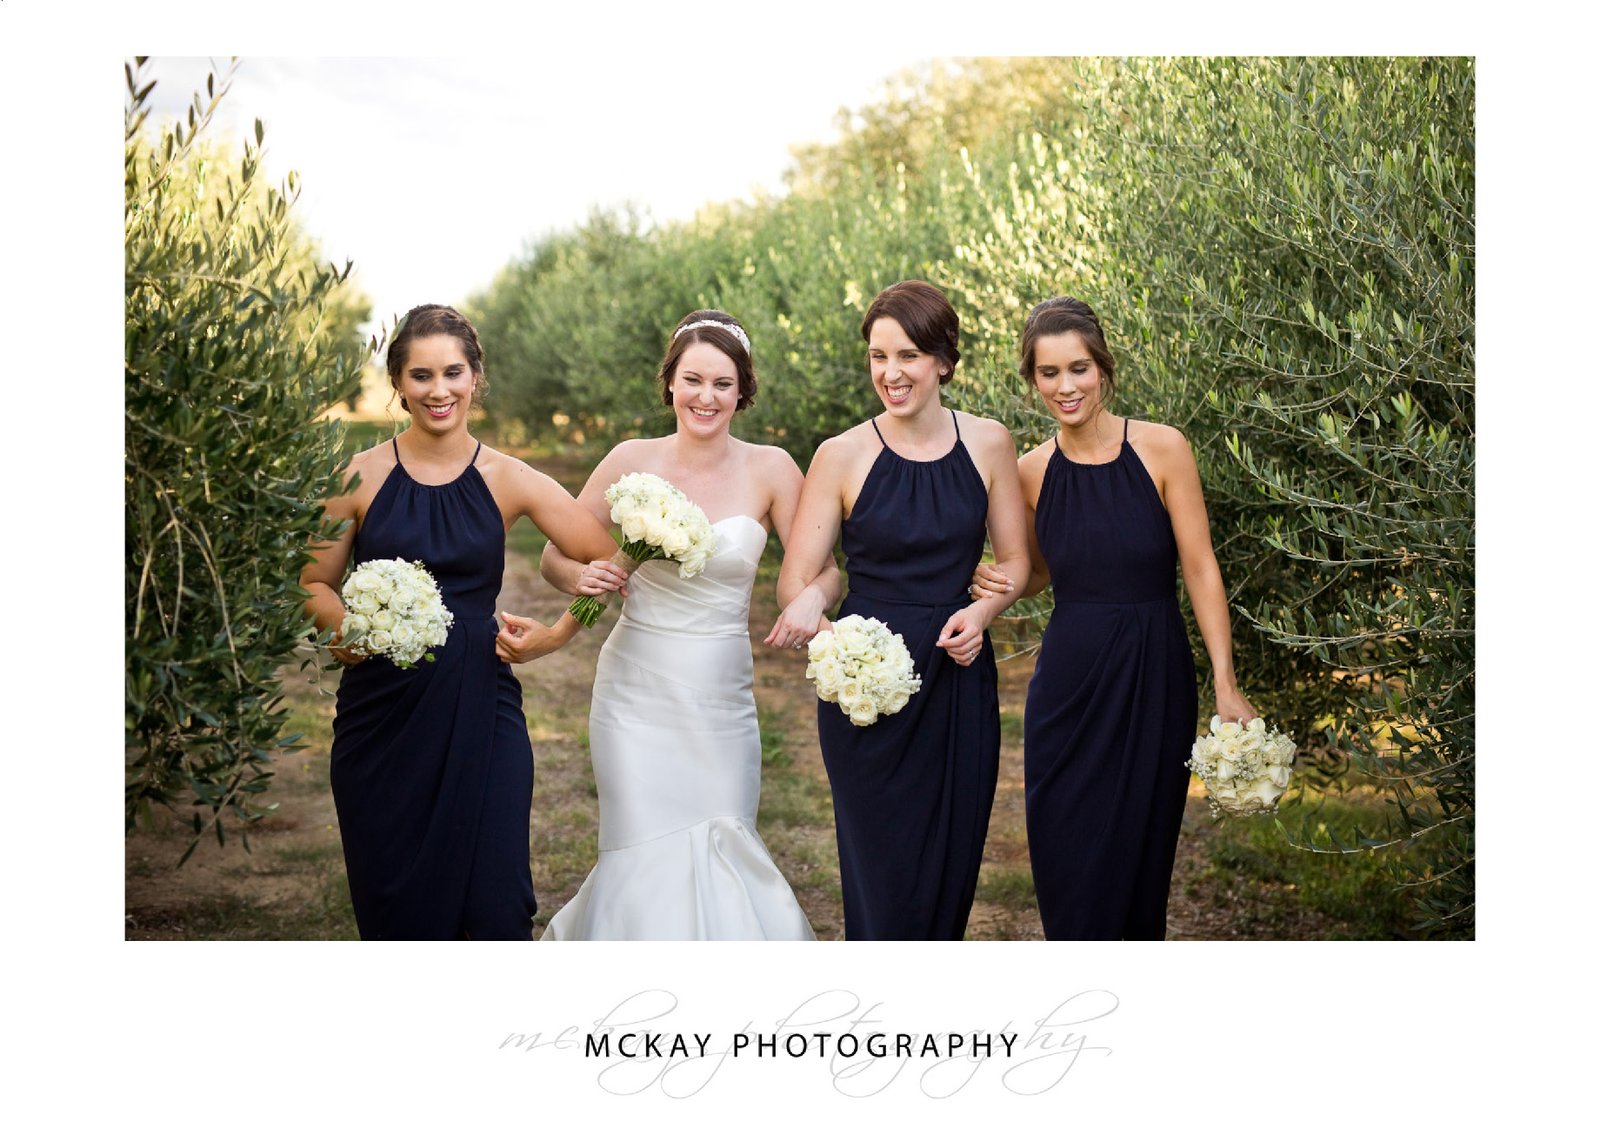 The bridesmaid amongst the olive grove